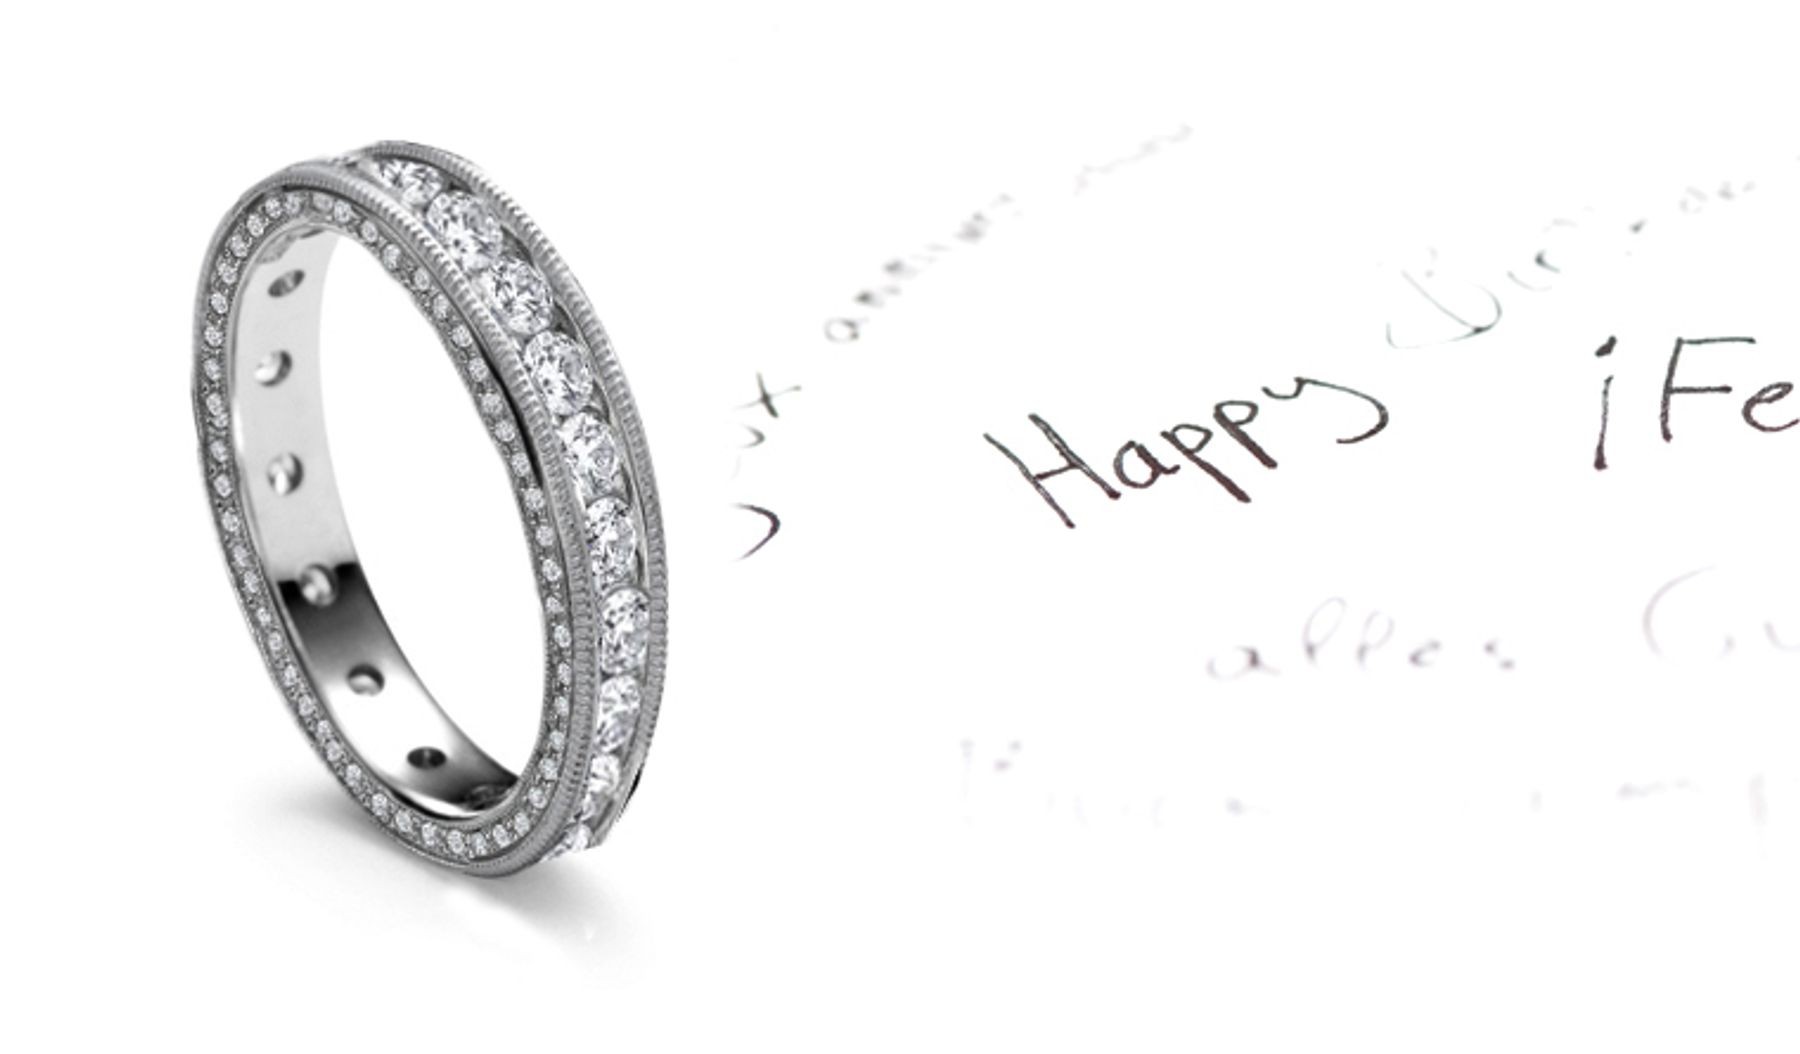 Diamond Wedding Ring Dressed With Well-Cut Diamonds Halos Decorated on Sides of Platinum 